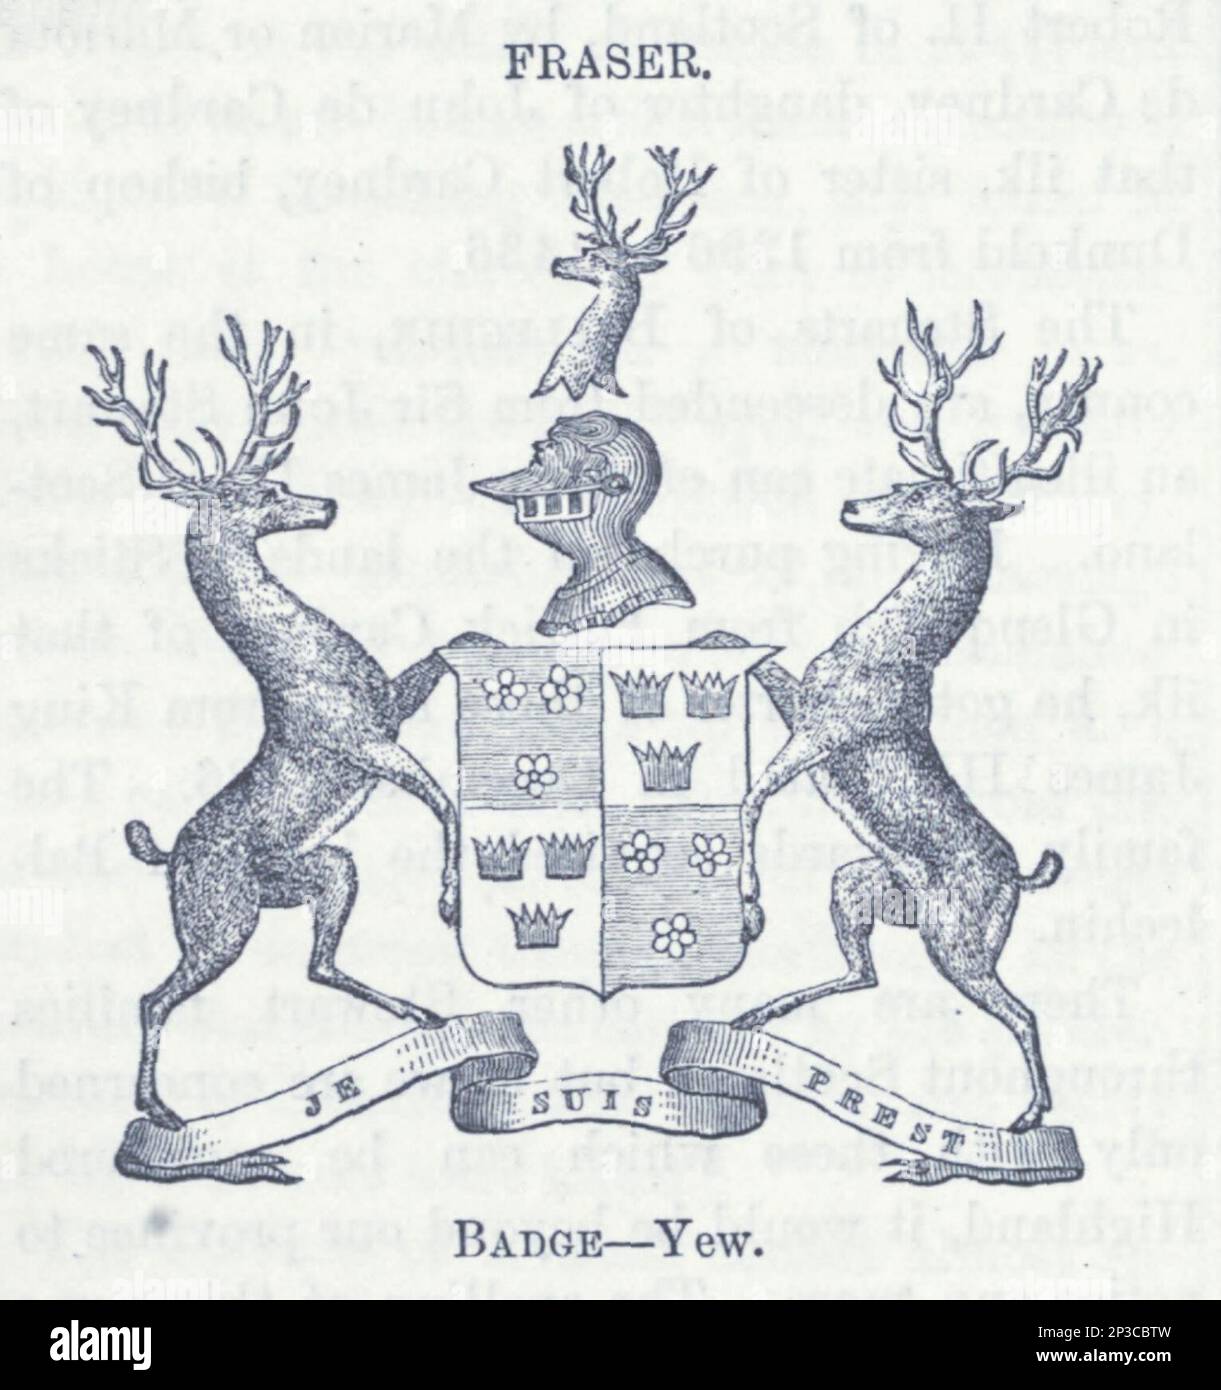 Fraser coat of arms, crest, and motto from the book ' A history of the Scottish Highlands, Highland clans and Highland regiments ' Volume 2 by Maclauchlan, Thomas, 1816-1886; Wilson, John, 1785-1854; Keltie, John Scott, Sir, 1840-1927 Publication date 1875 publisher Edinburgh ; London : A. Fullarton Stock Photo